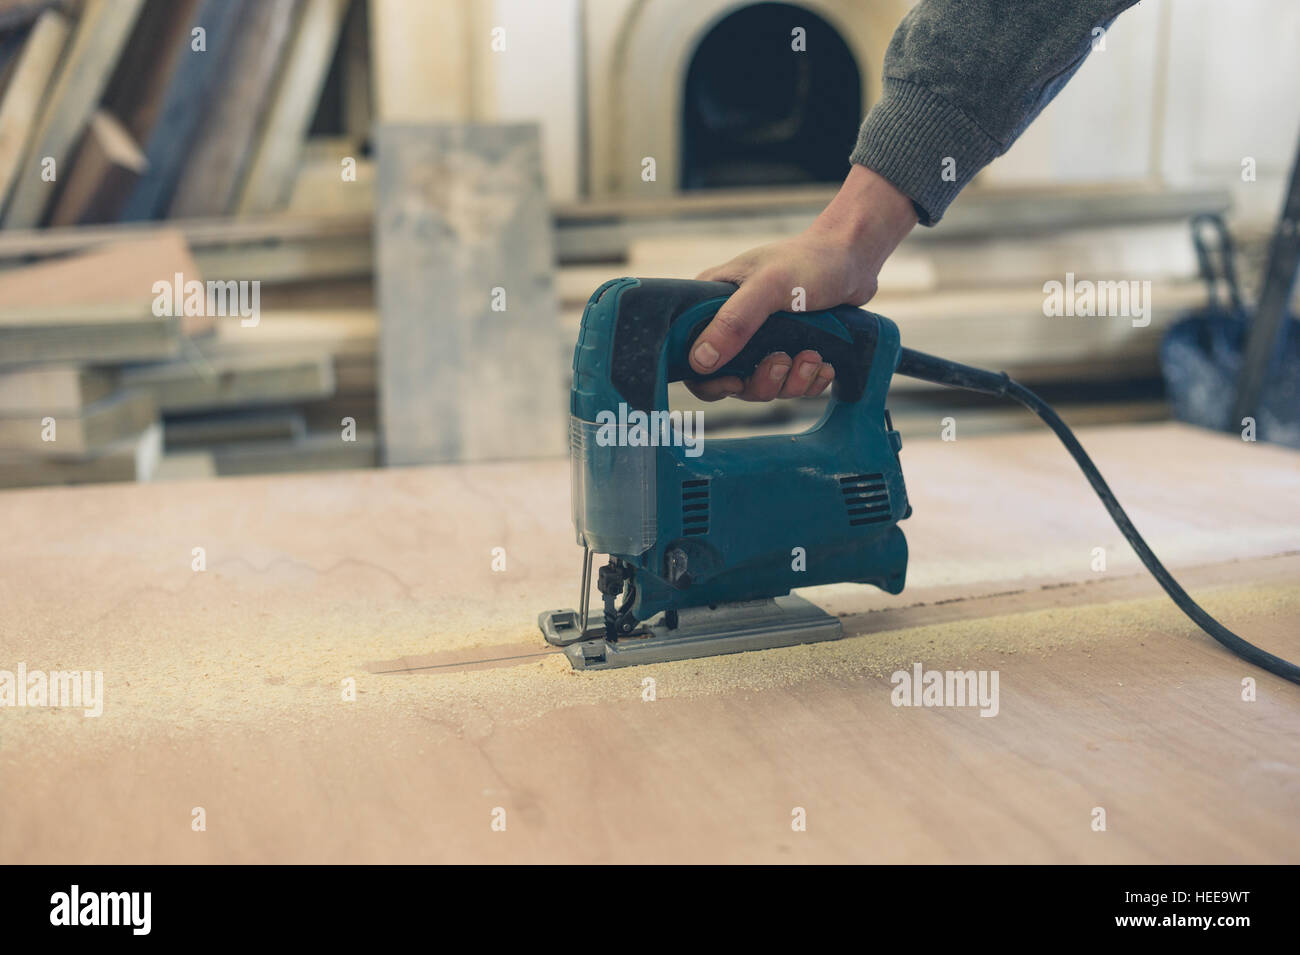 A young worker is cutting a sheet of plywood with a jigsaw indoors Stock Photo